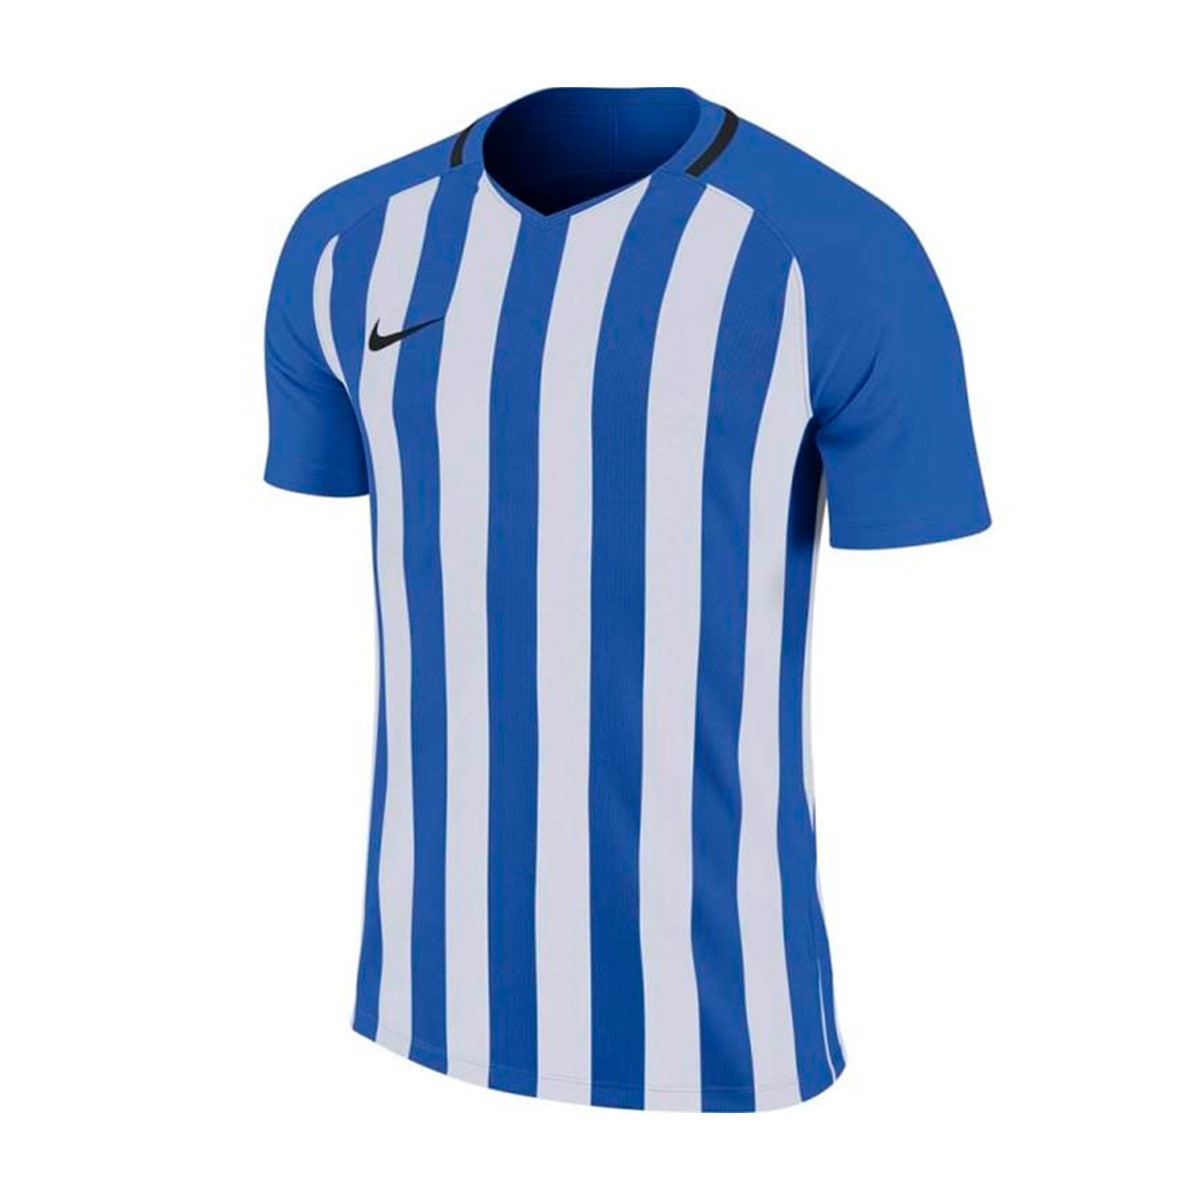 royal blue and white jersey